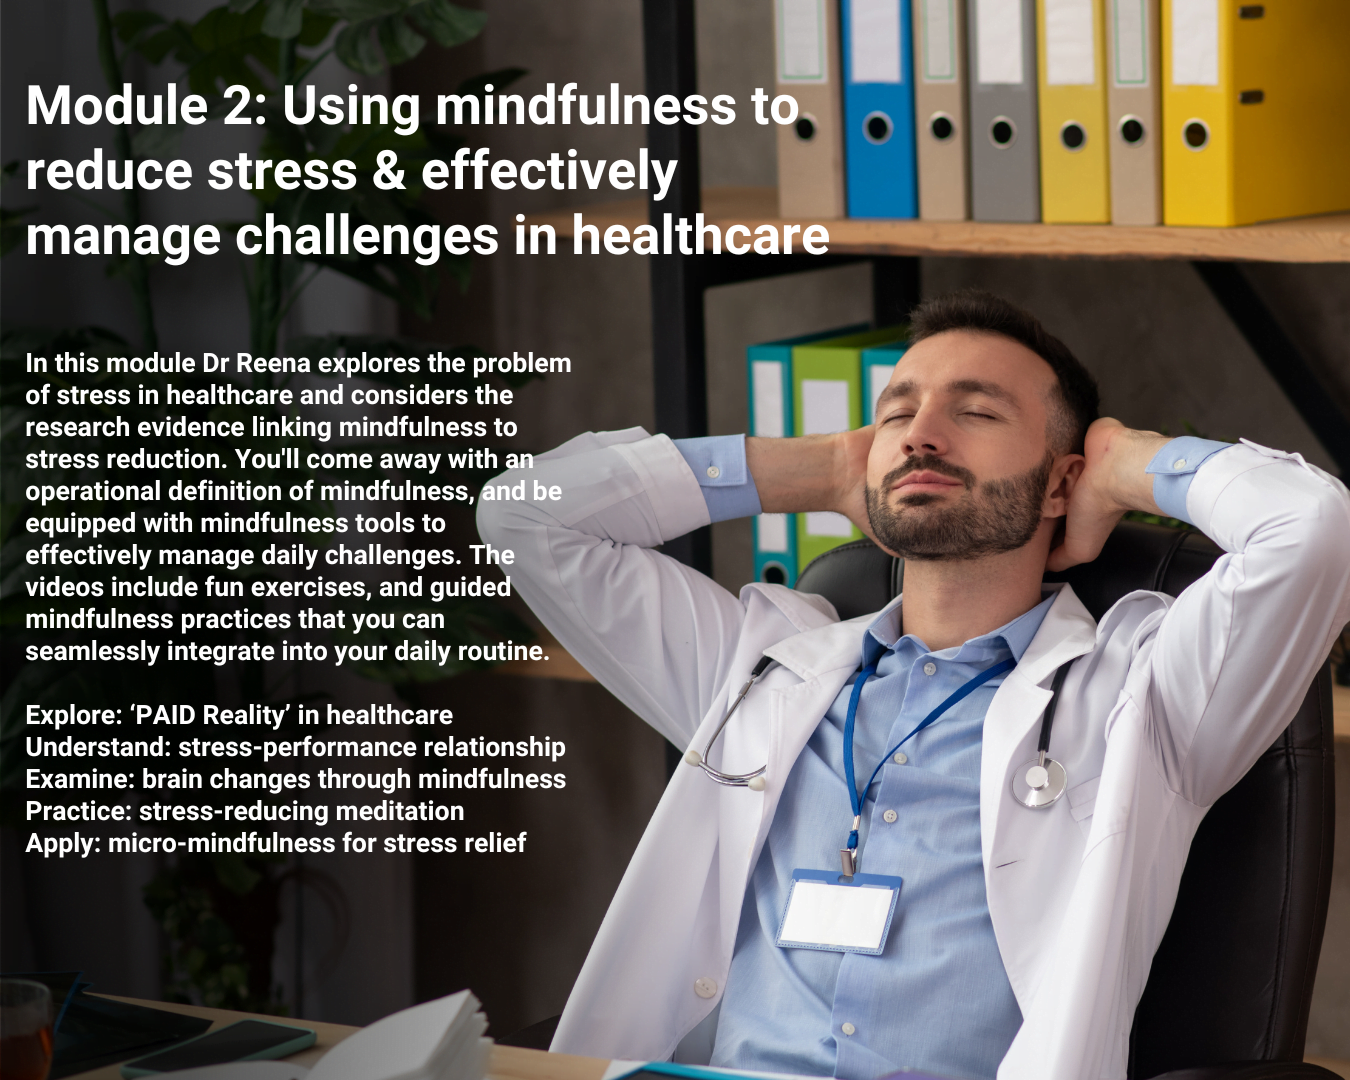 Module 2: Using mindfulness to reduce stress & effectively manage challenges in healthcare.